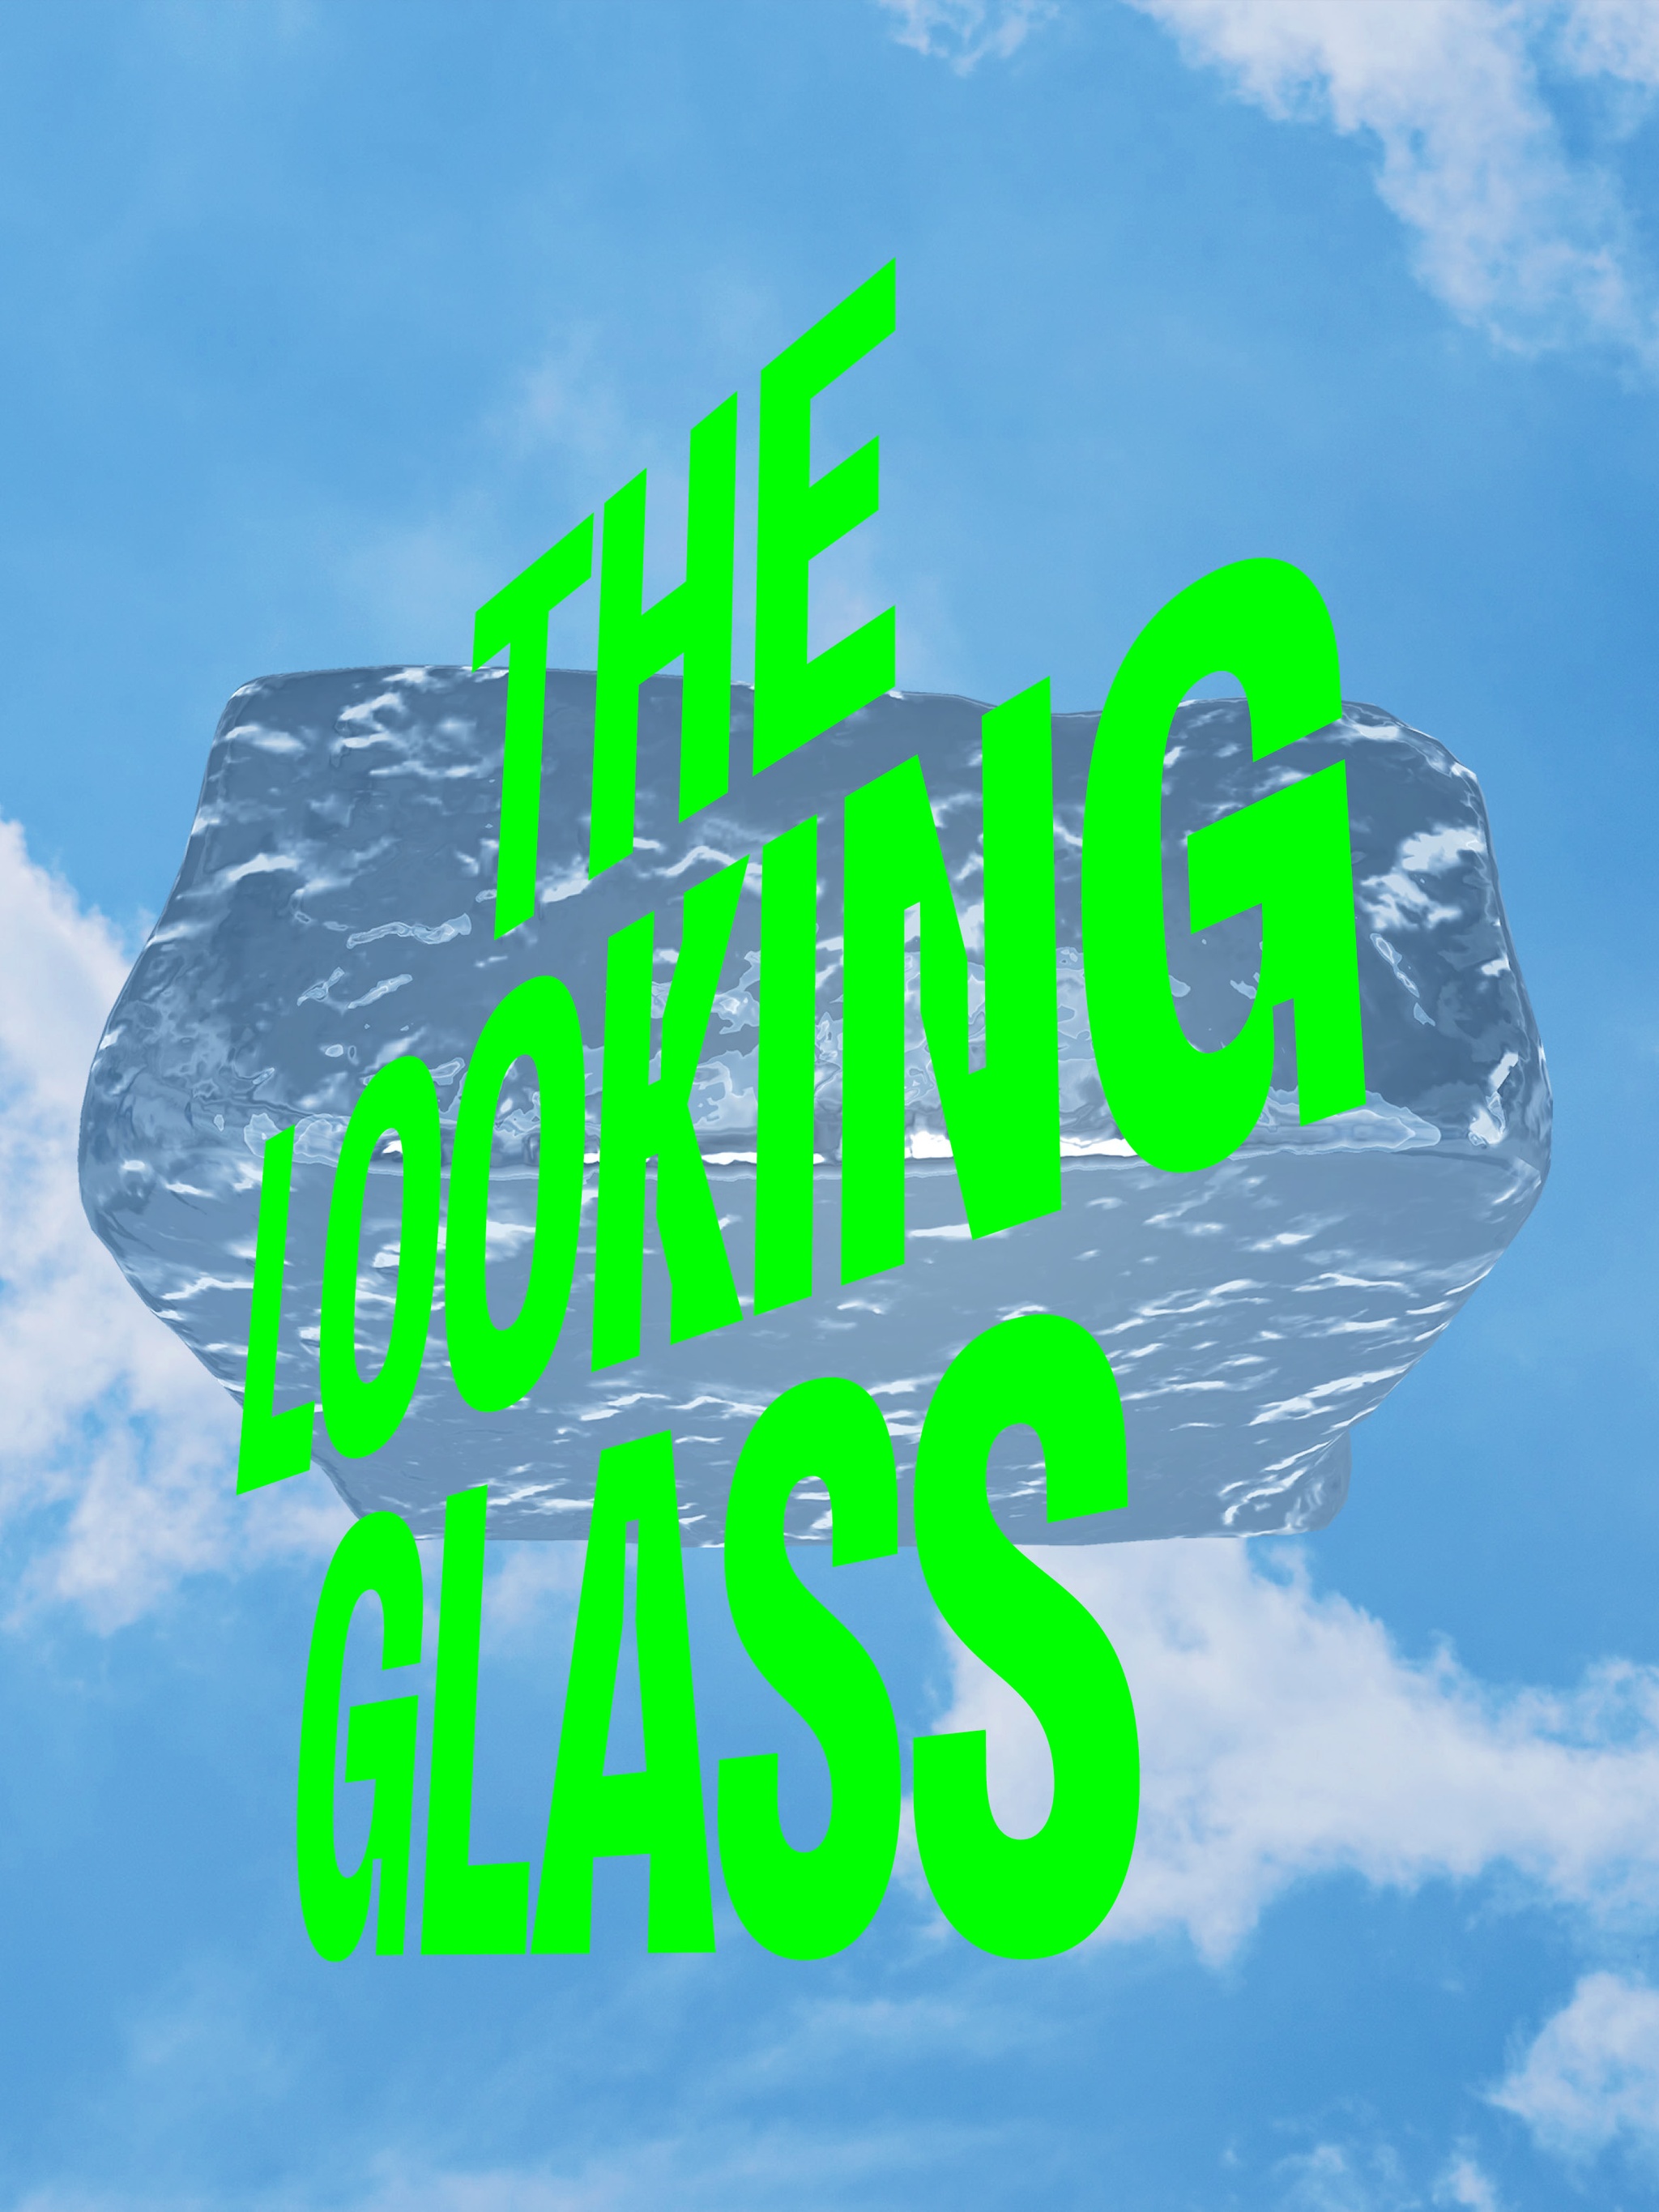 The exhibition title The Looking Glass superimposed over a geometric patch of ripply water surrealistically suspended over a blue sky with white puffy clouds in the background. The text is slanted on a diagonal over the image to give the illusion of depth in the image.